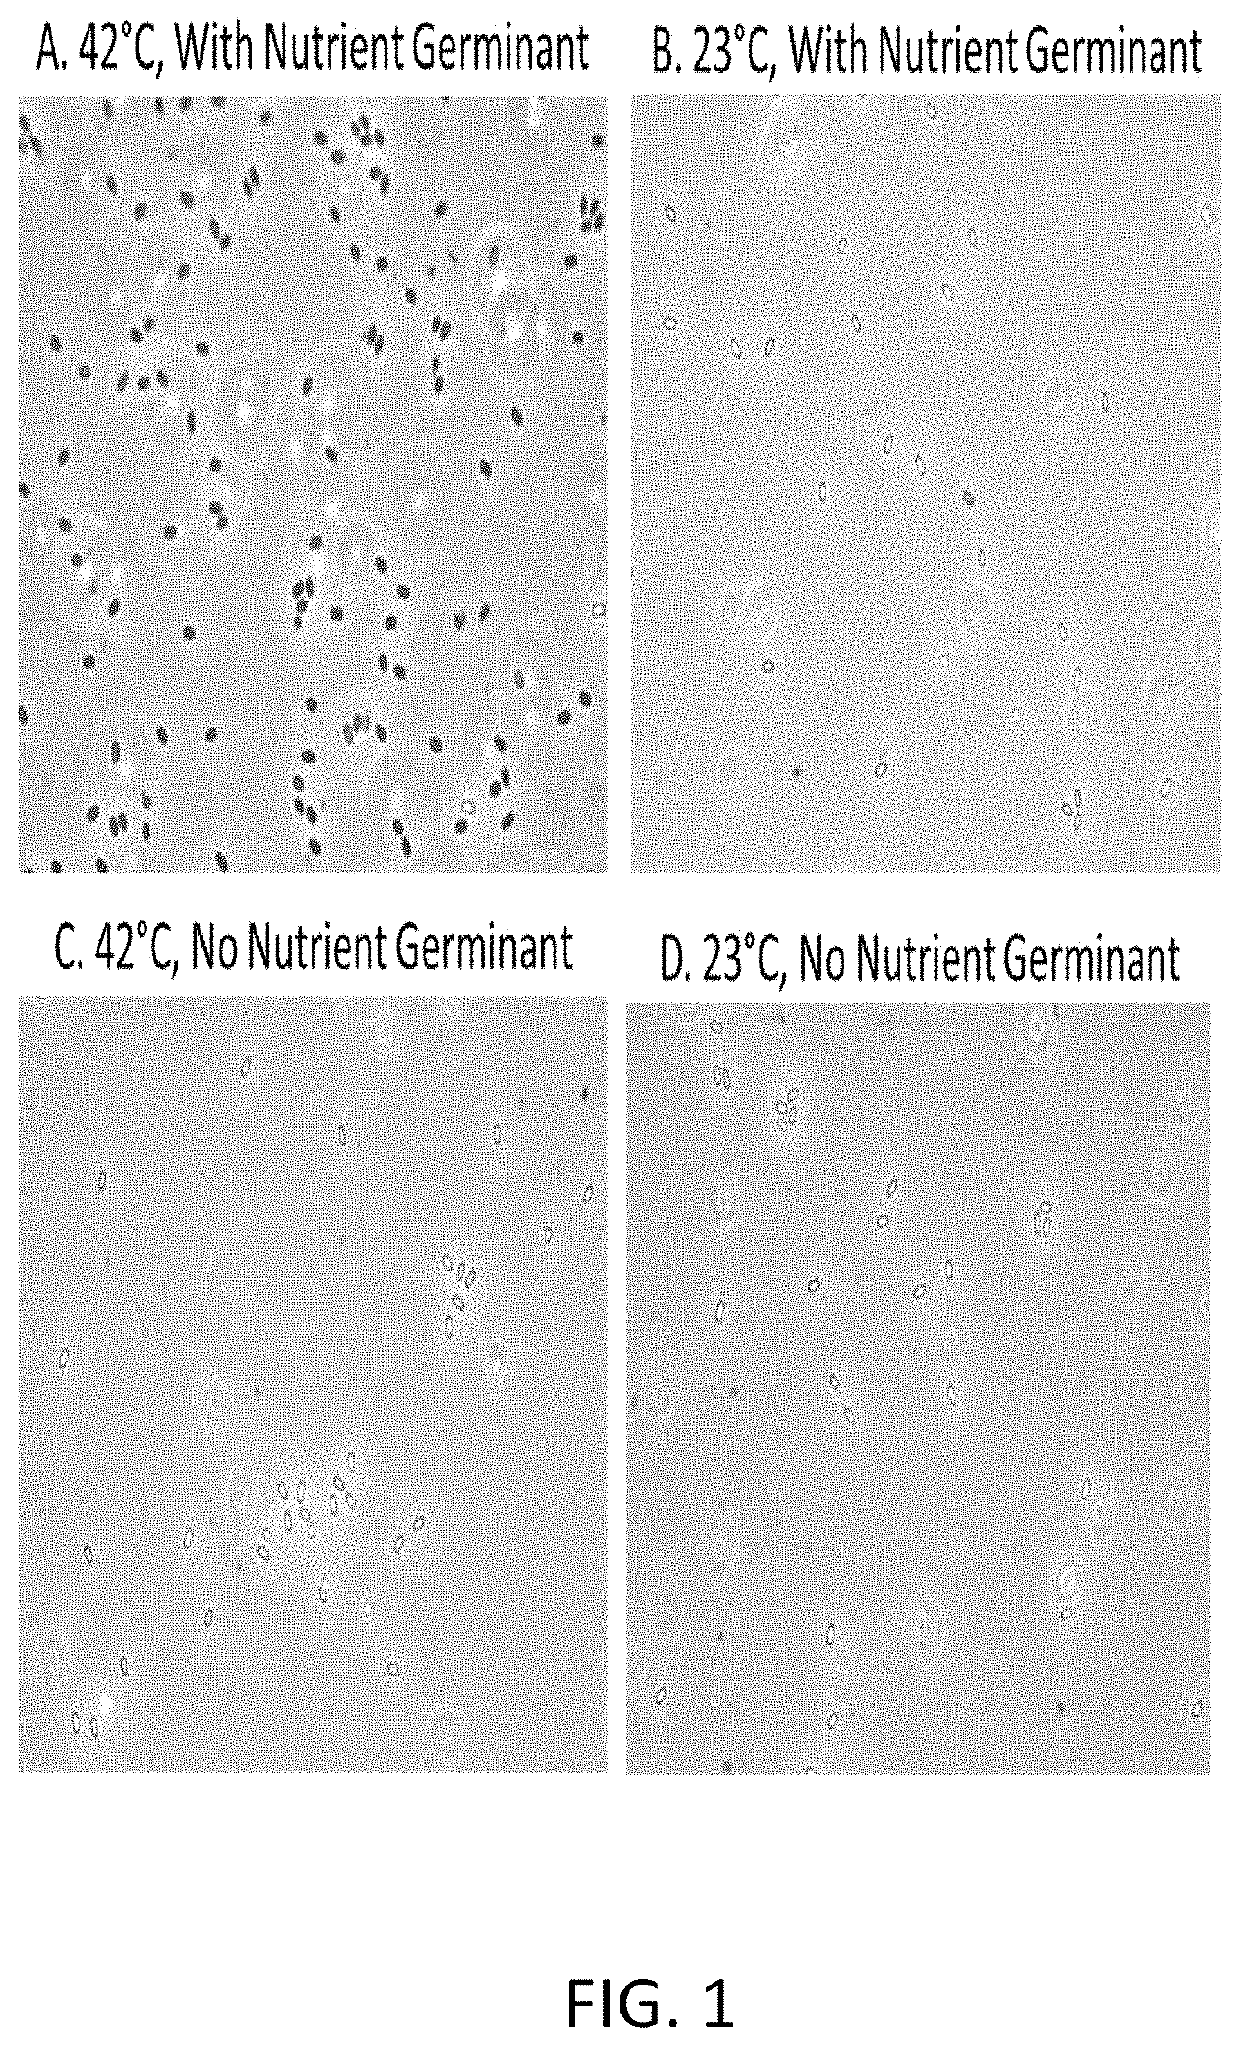 Nutrient rich germinant composition and spore incubation method